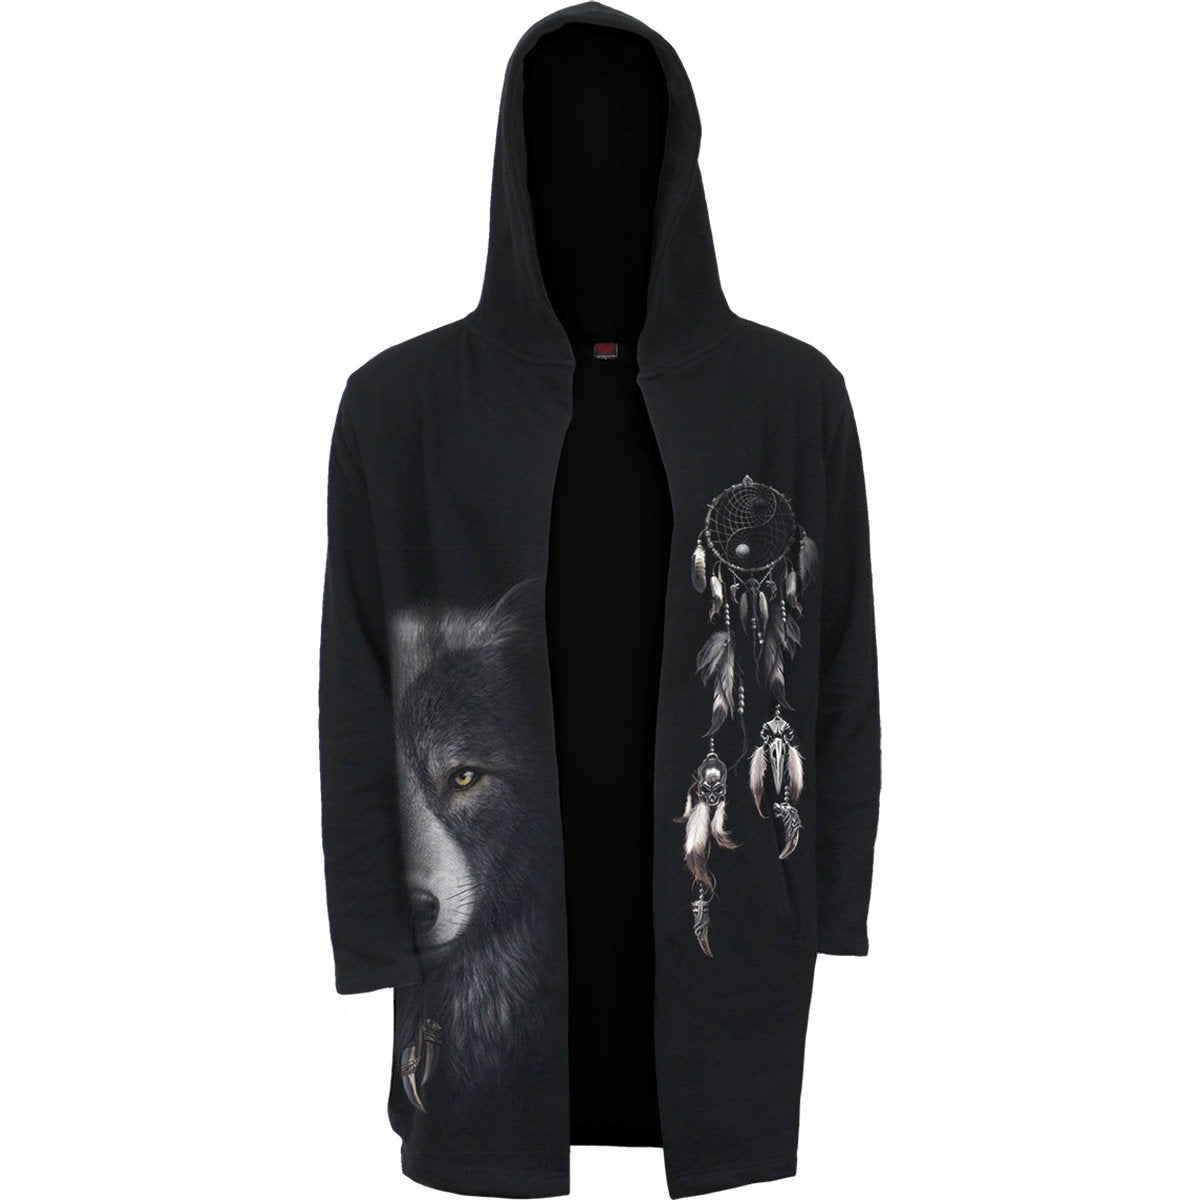 WOLF CHI - Occult Hooded Cardigan - Spiral USA